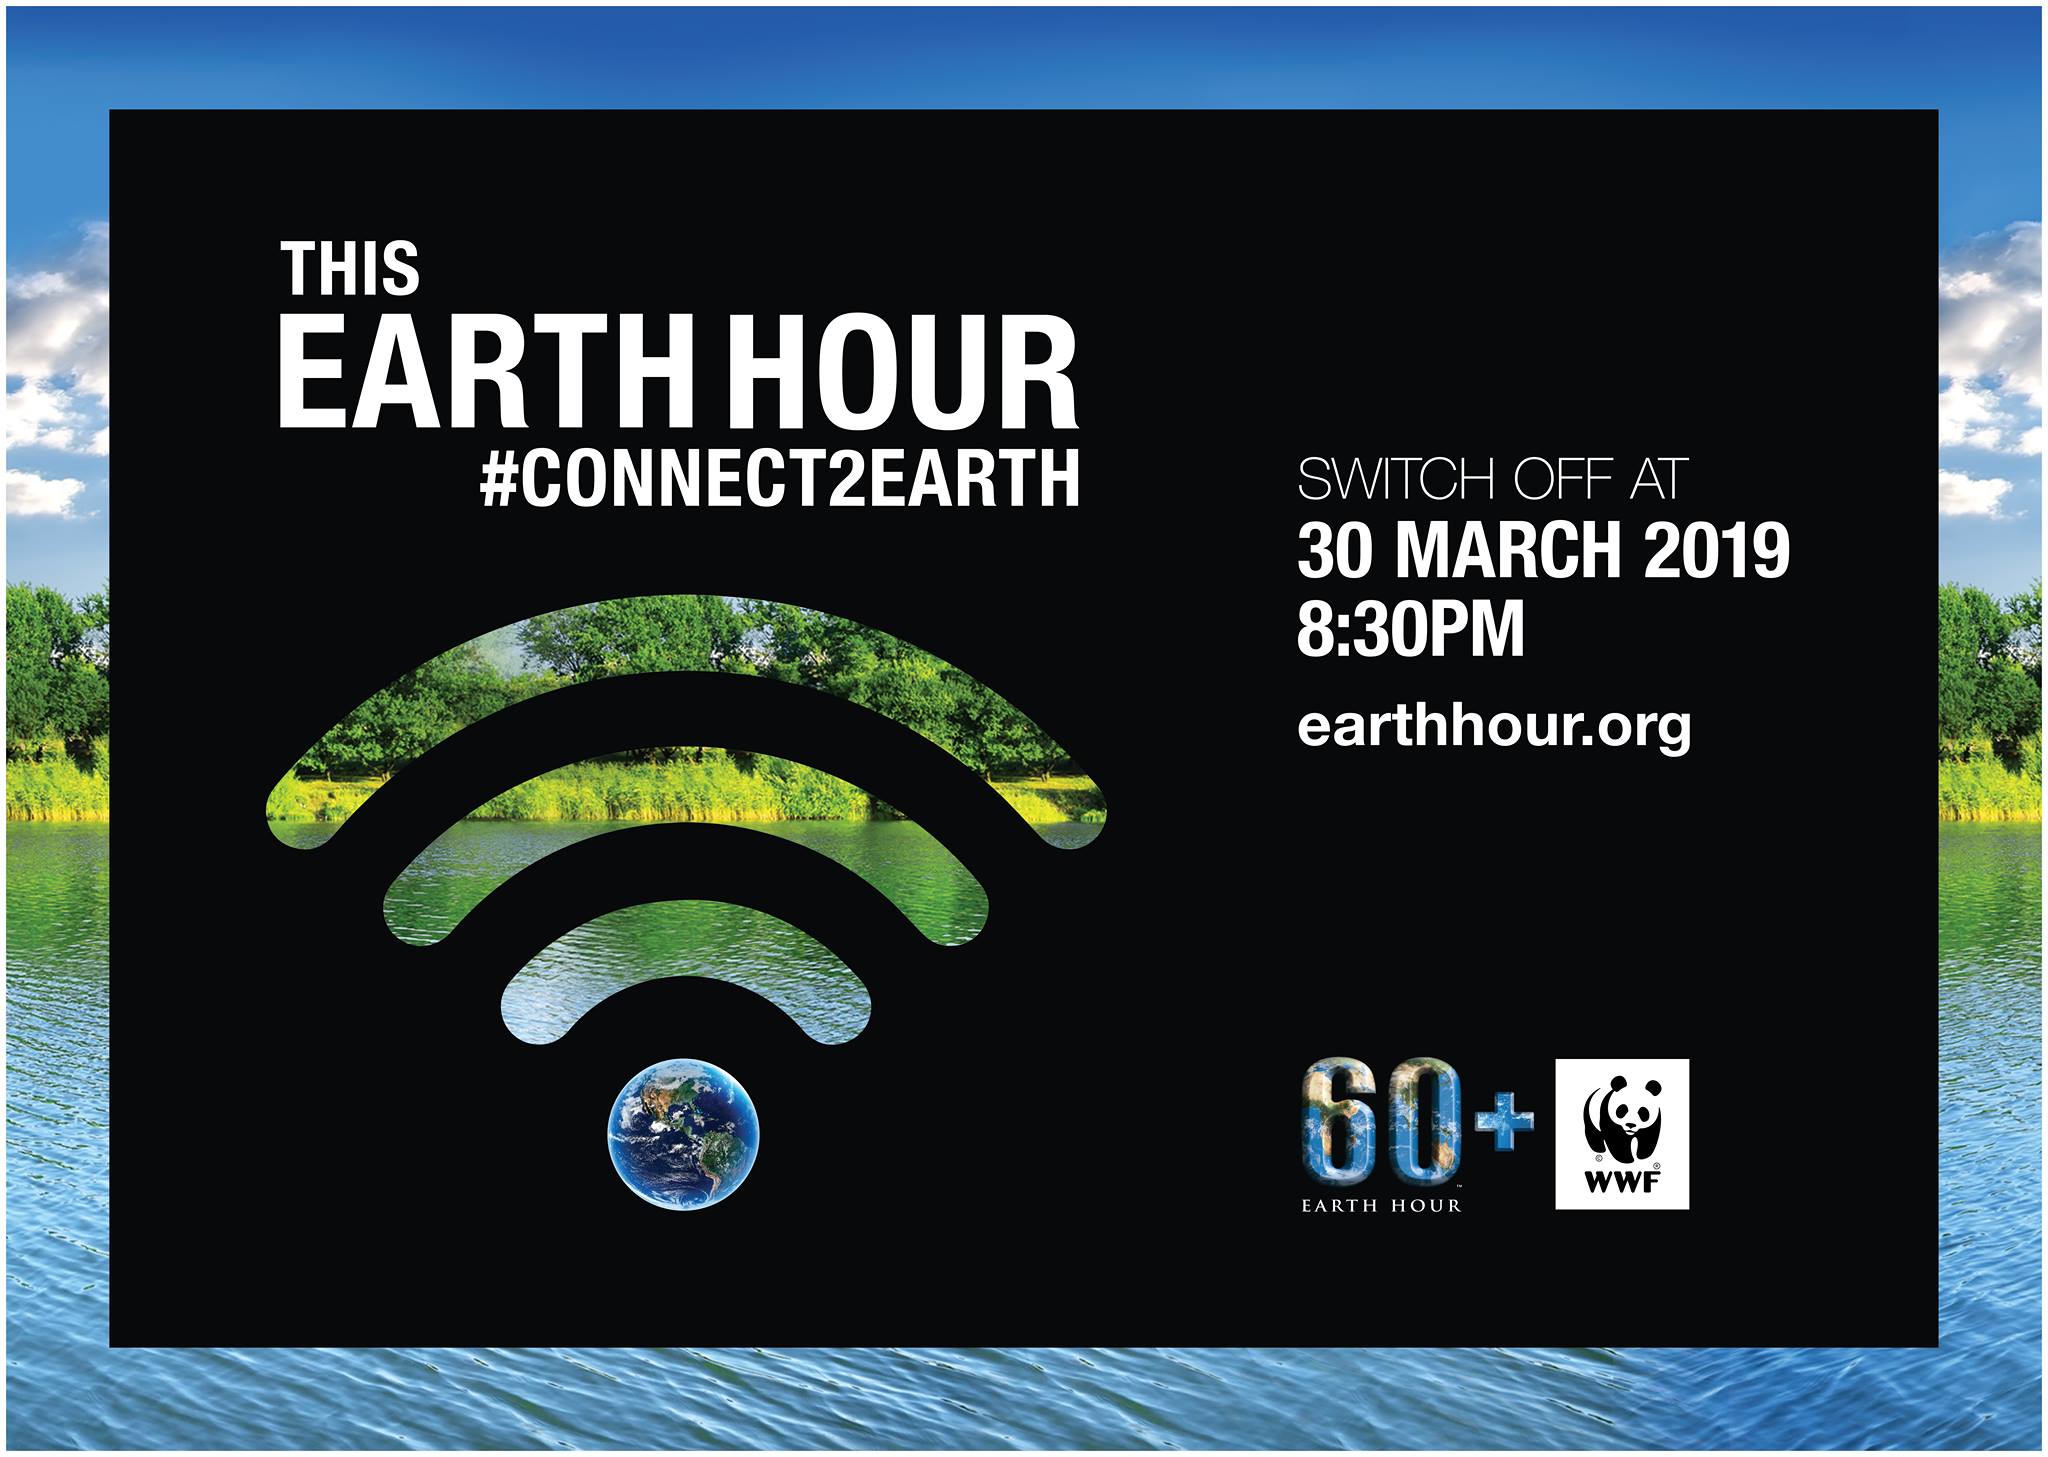 Update: Earth Hour 2019 Celebrated In Hungary On 30 March